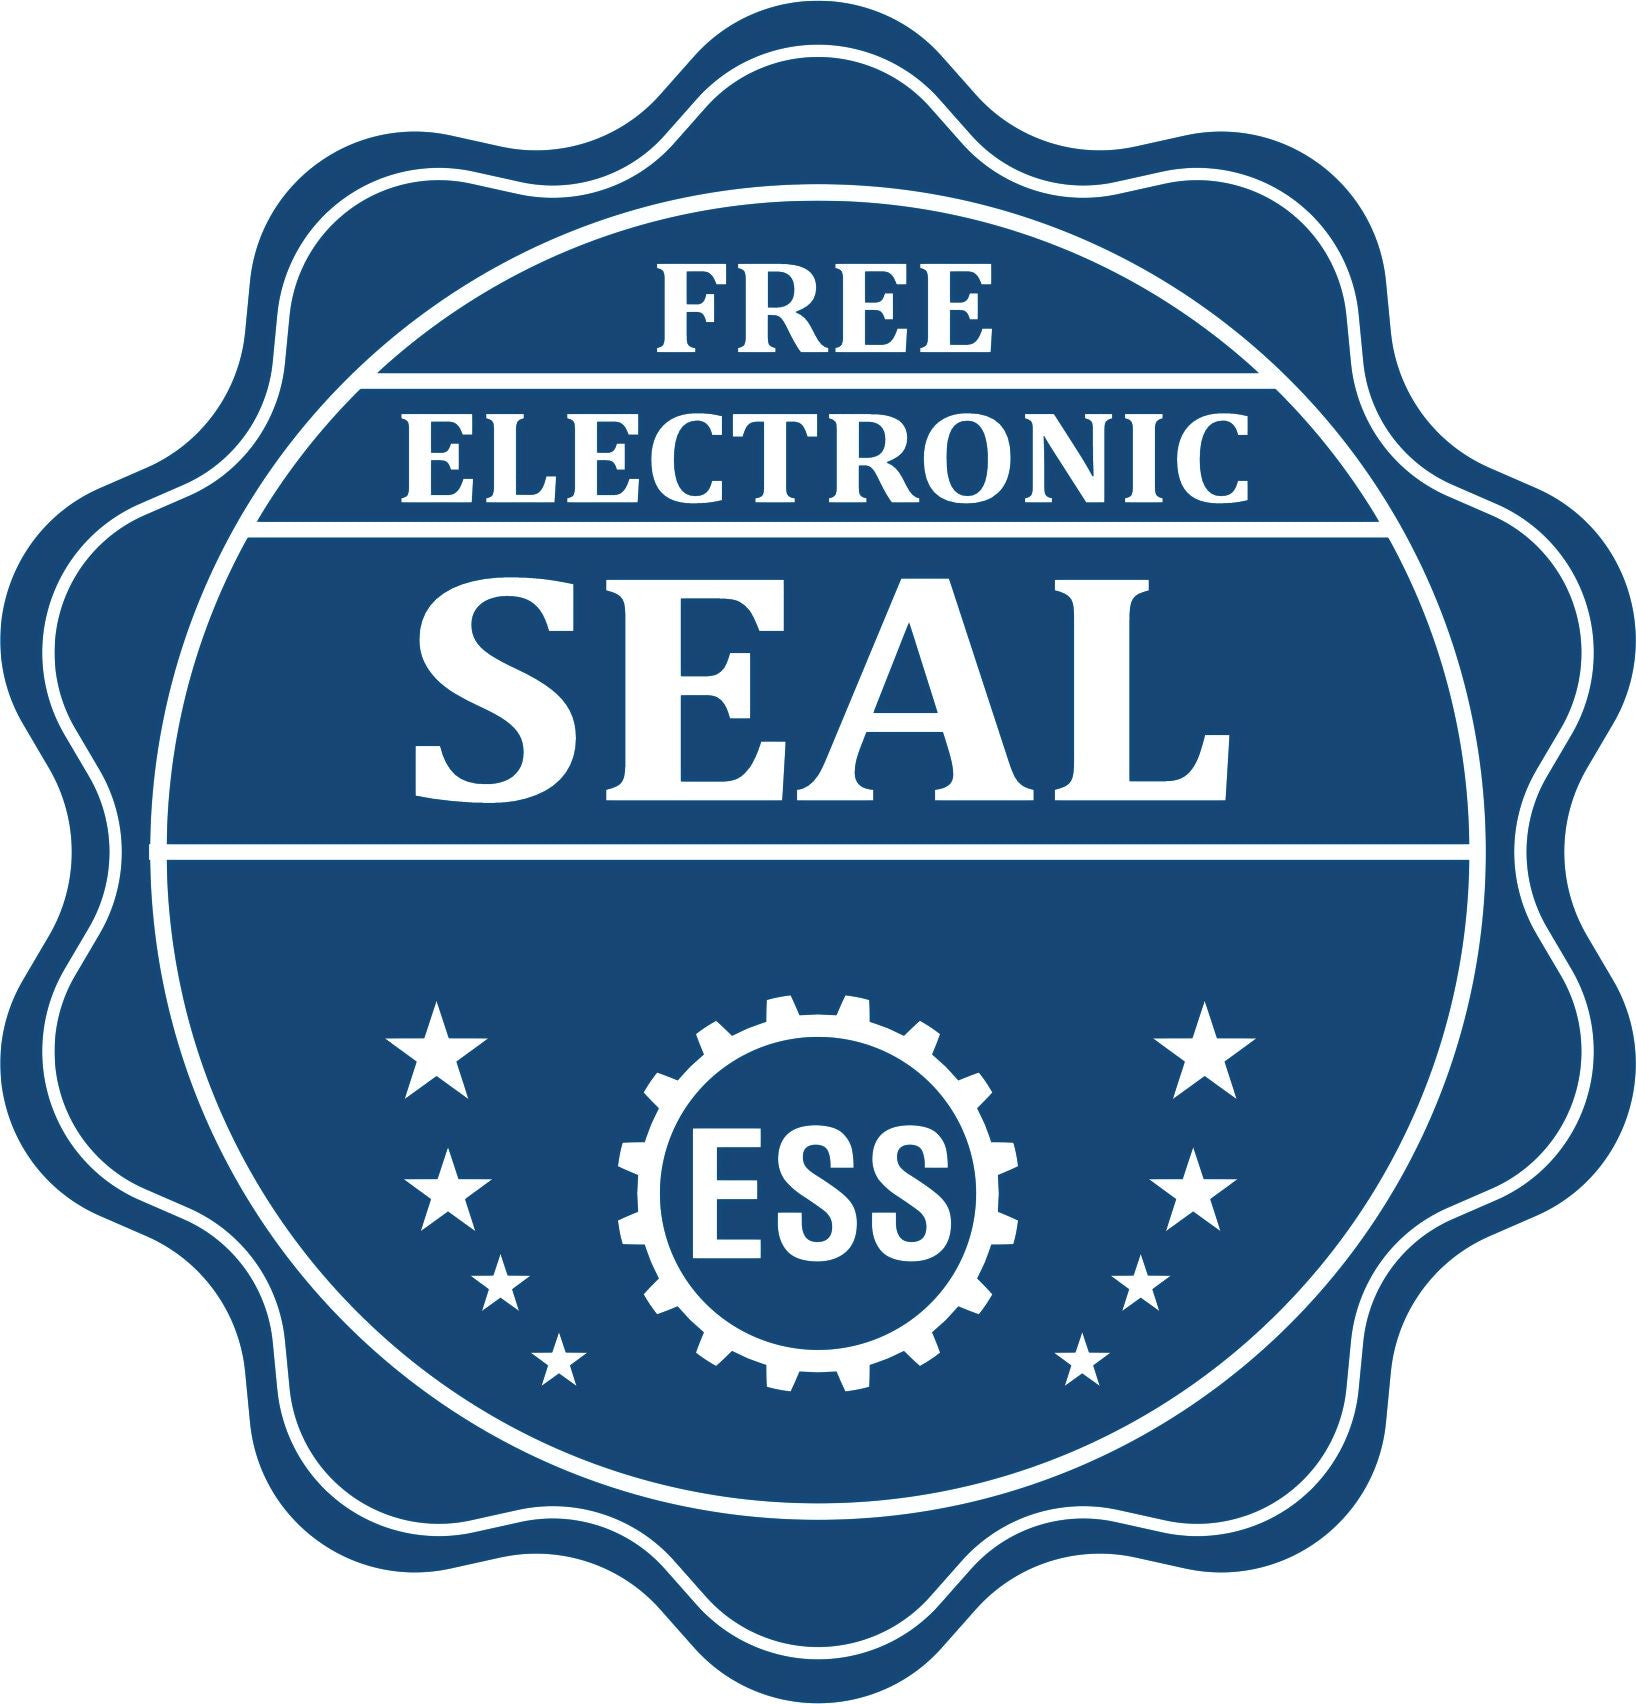 A badge showing a free electronic seal for the Gift Iowa Architect Seal with stars and the ESS gear on the emblem.